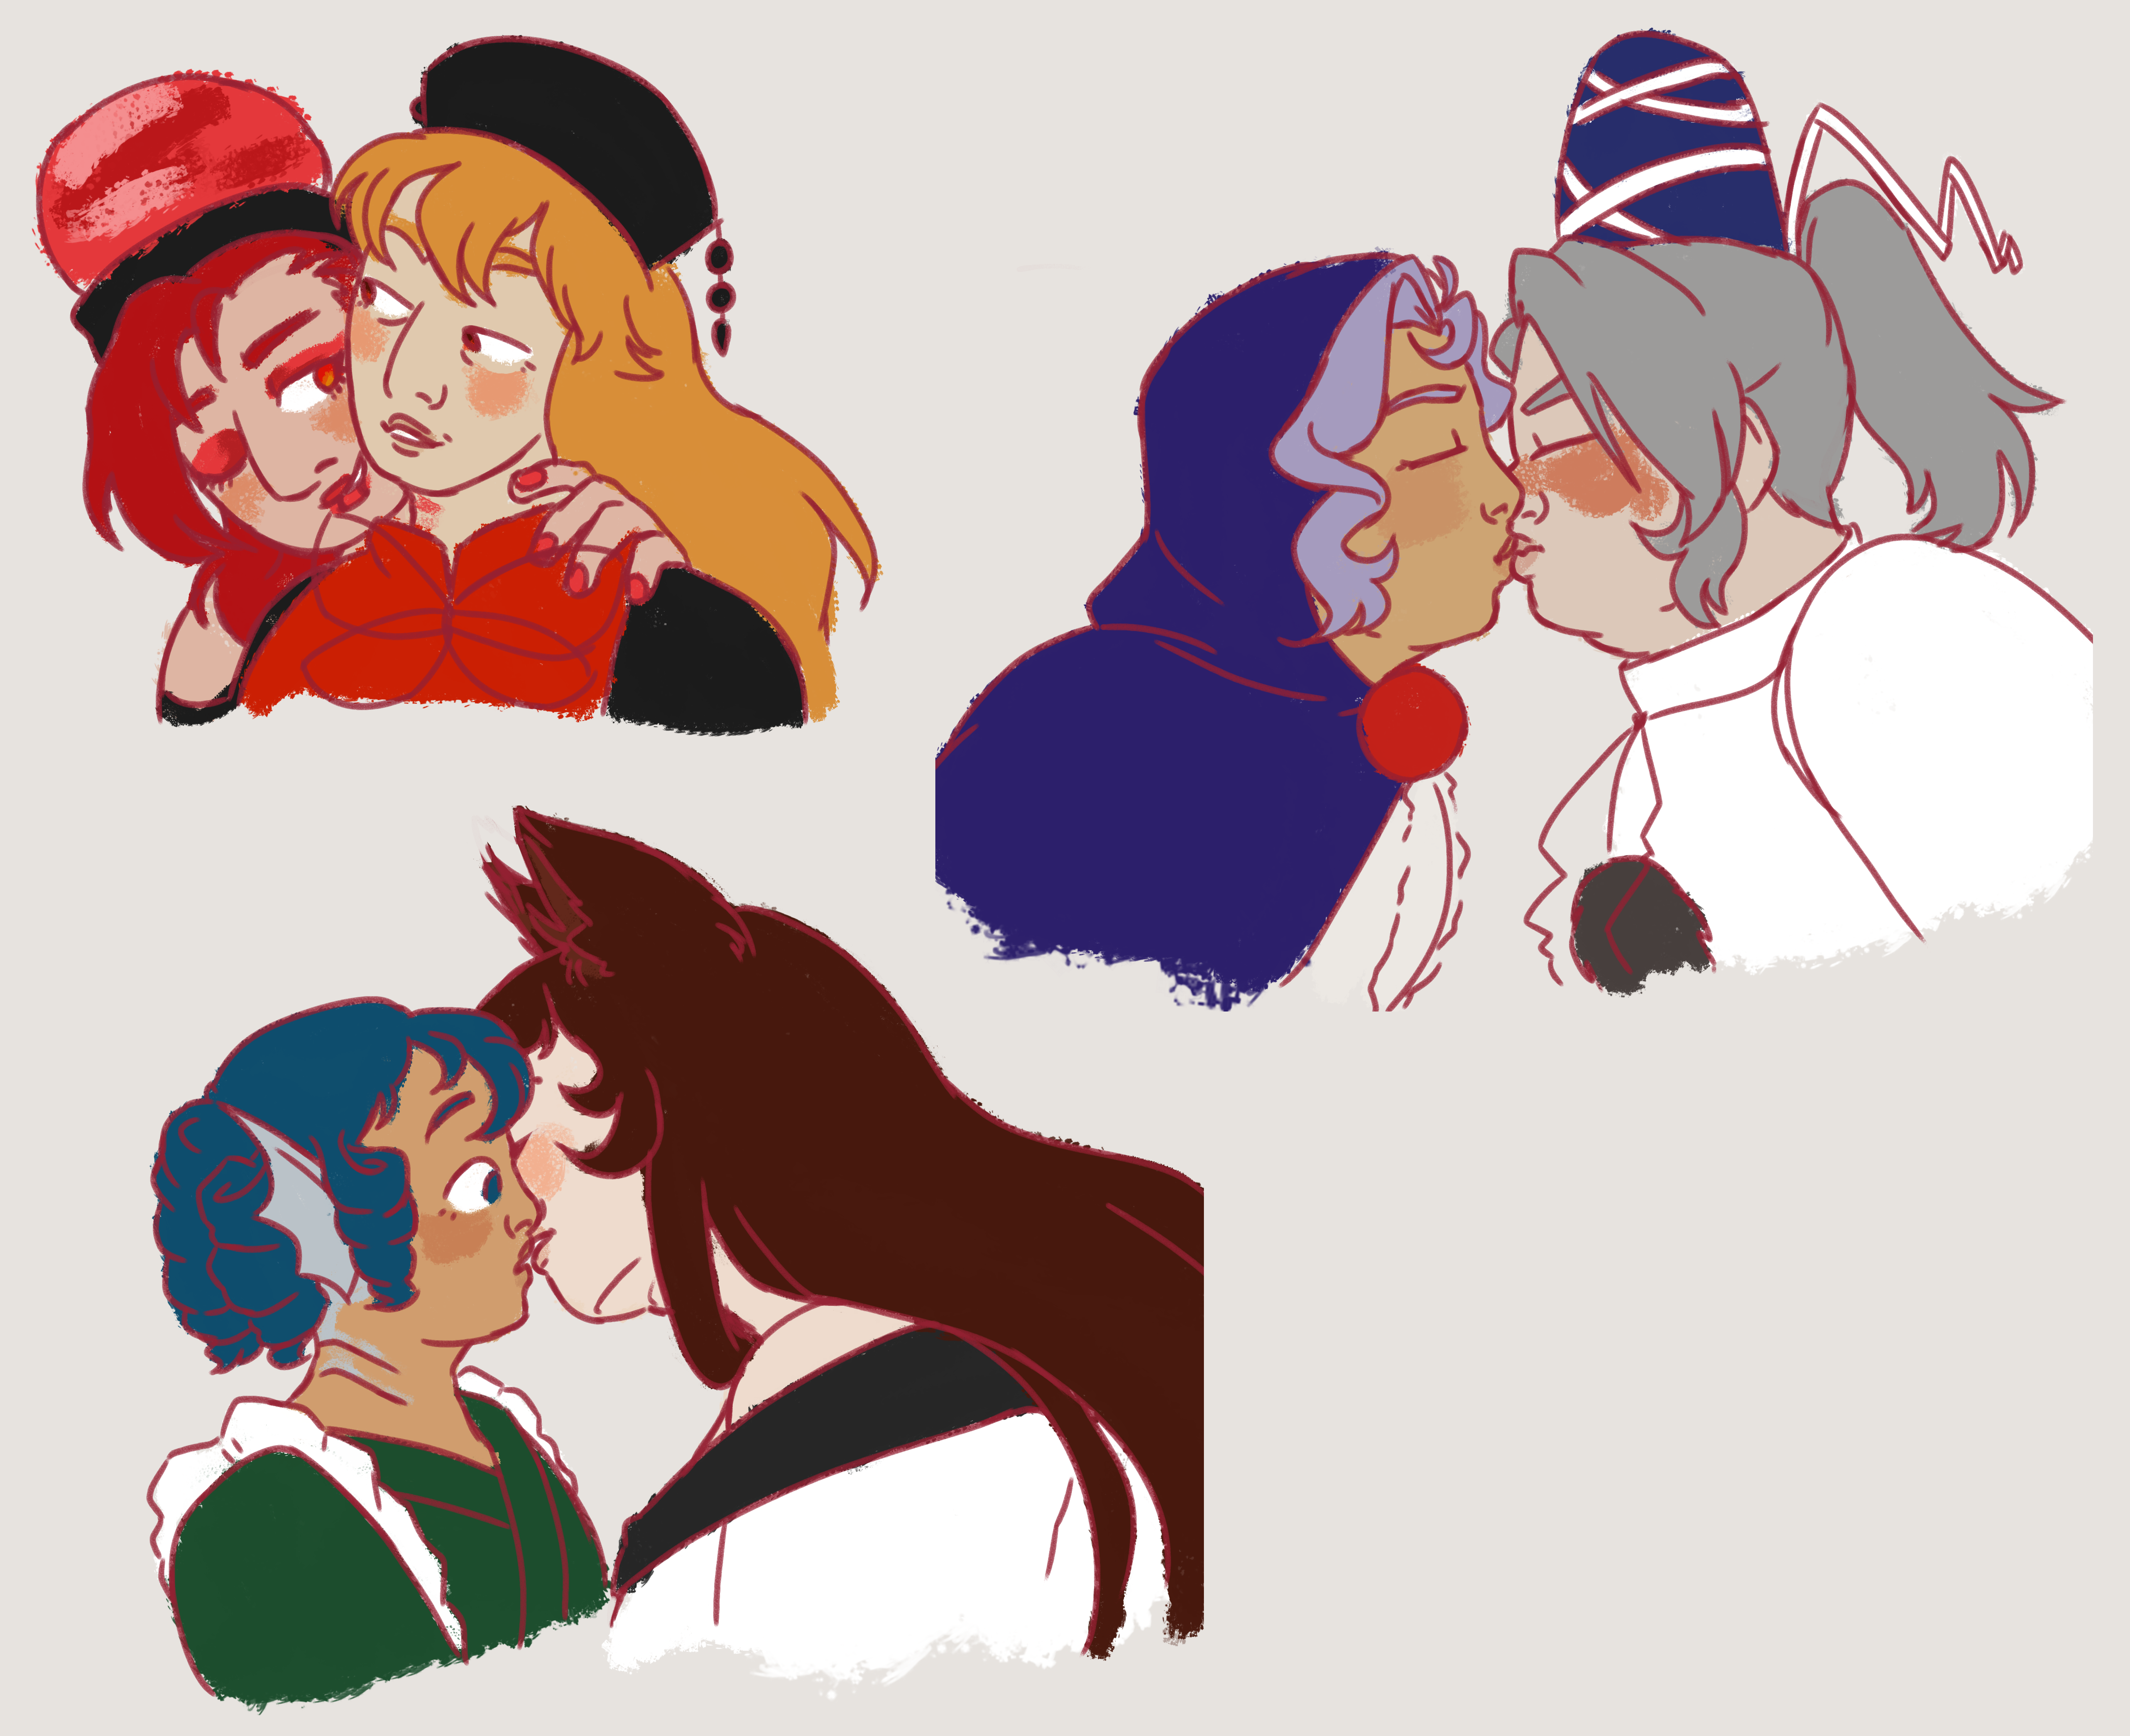 three drawings of pairs of Touhou characters: Hecatia is caressing Junko after leaving a small lipstick mark on her neck; Ichirin and Futo are kissing, looking very flustered and trying their best; Kagerou is leaning in to kiss Wakasagihime, both looking shy